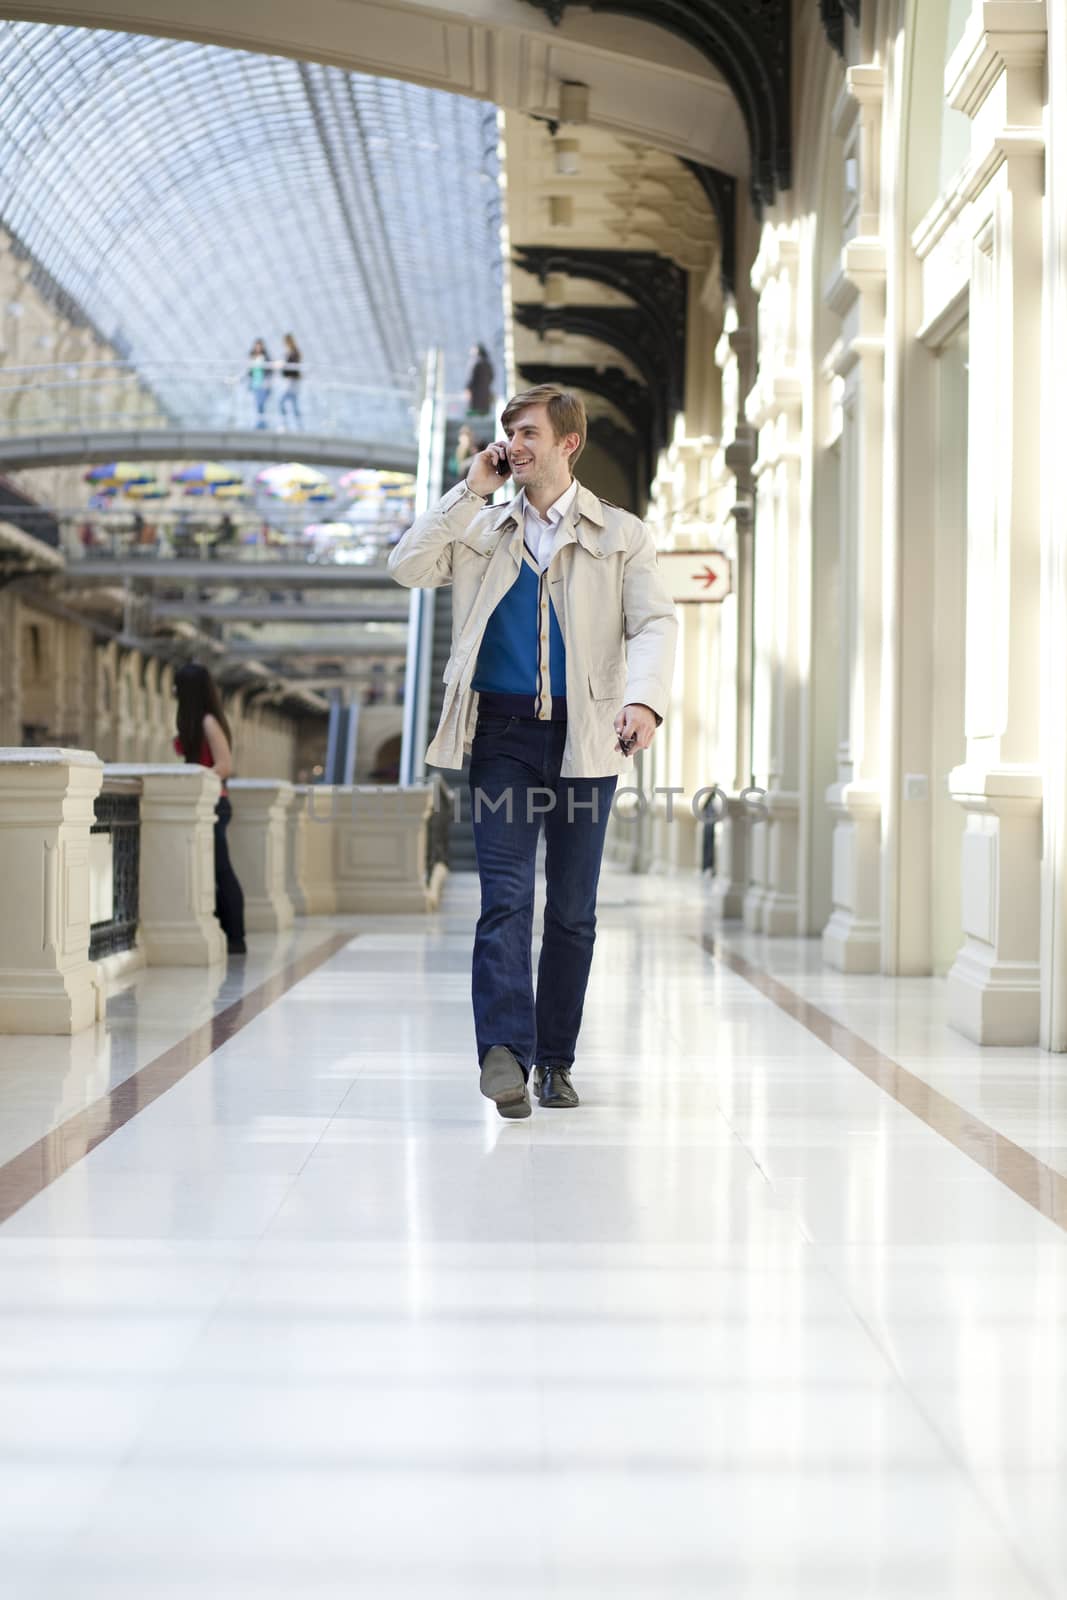 Young man walking in the store